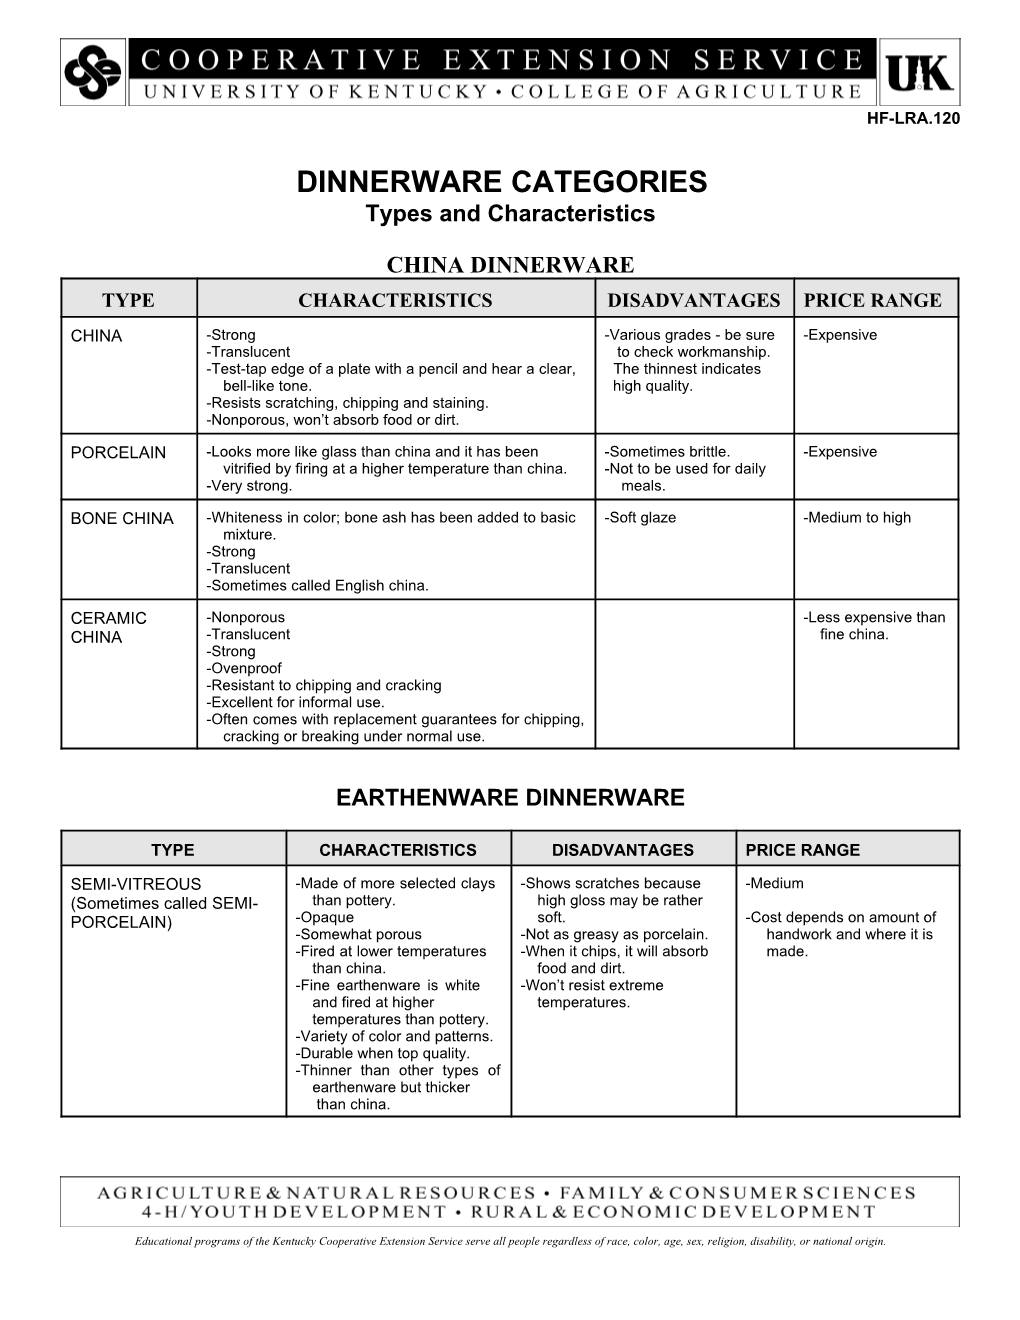 DINNERWARE CATEGORIES Types and Characteristics